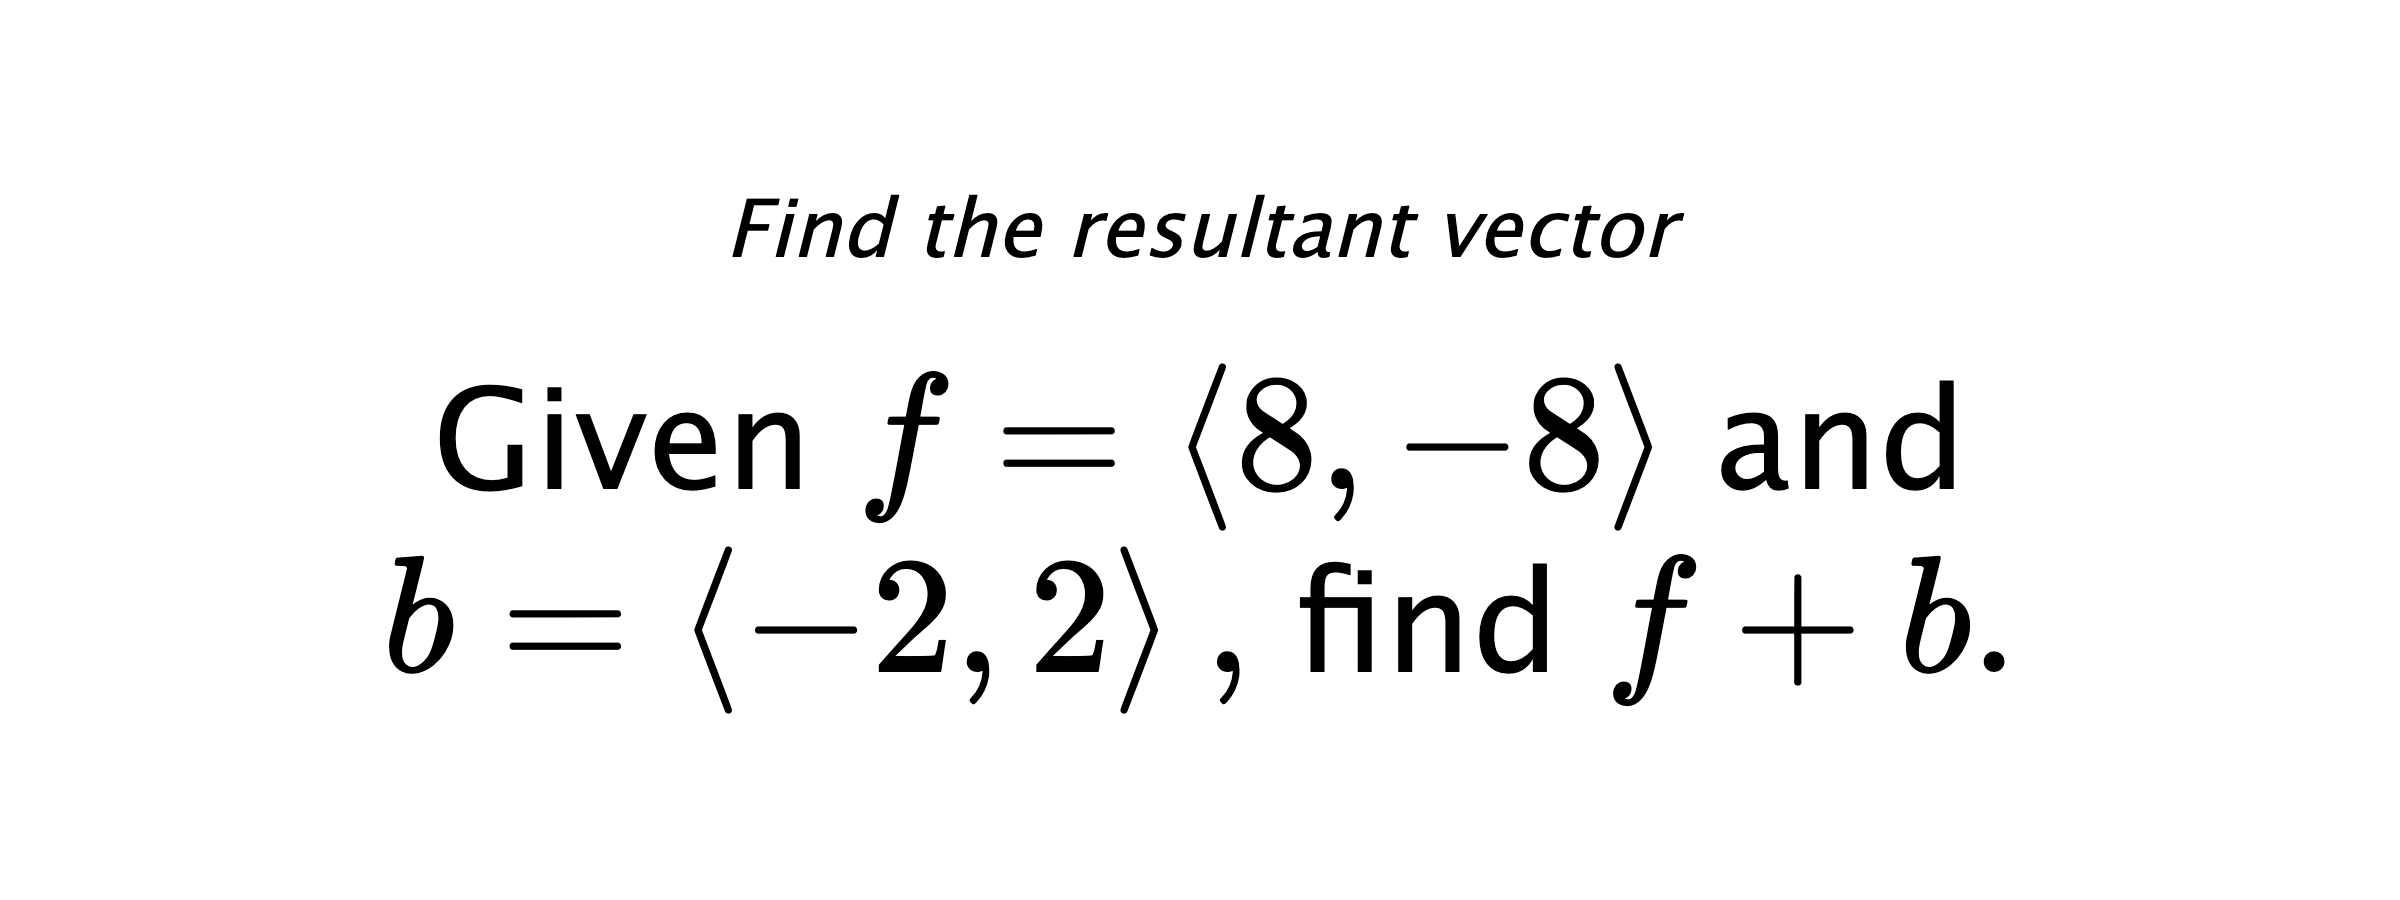 Find the resultant vector Given $ f = \left< 8,-8 \right> $ and $ b = \left< -2,2 \right> ,$ find $ f+b .$